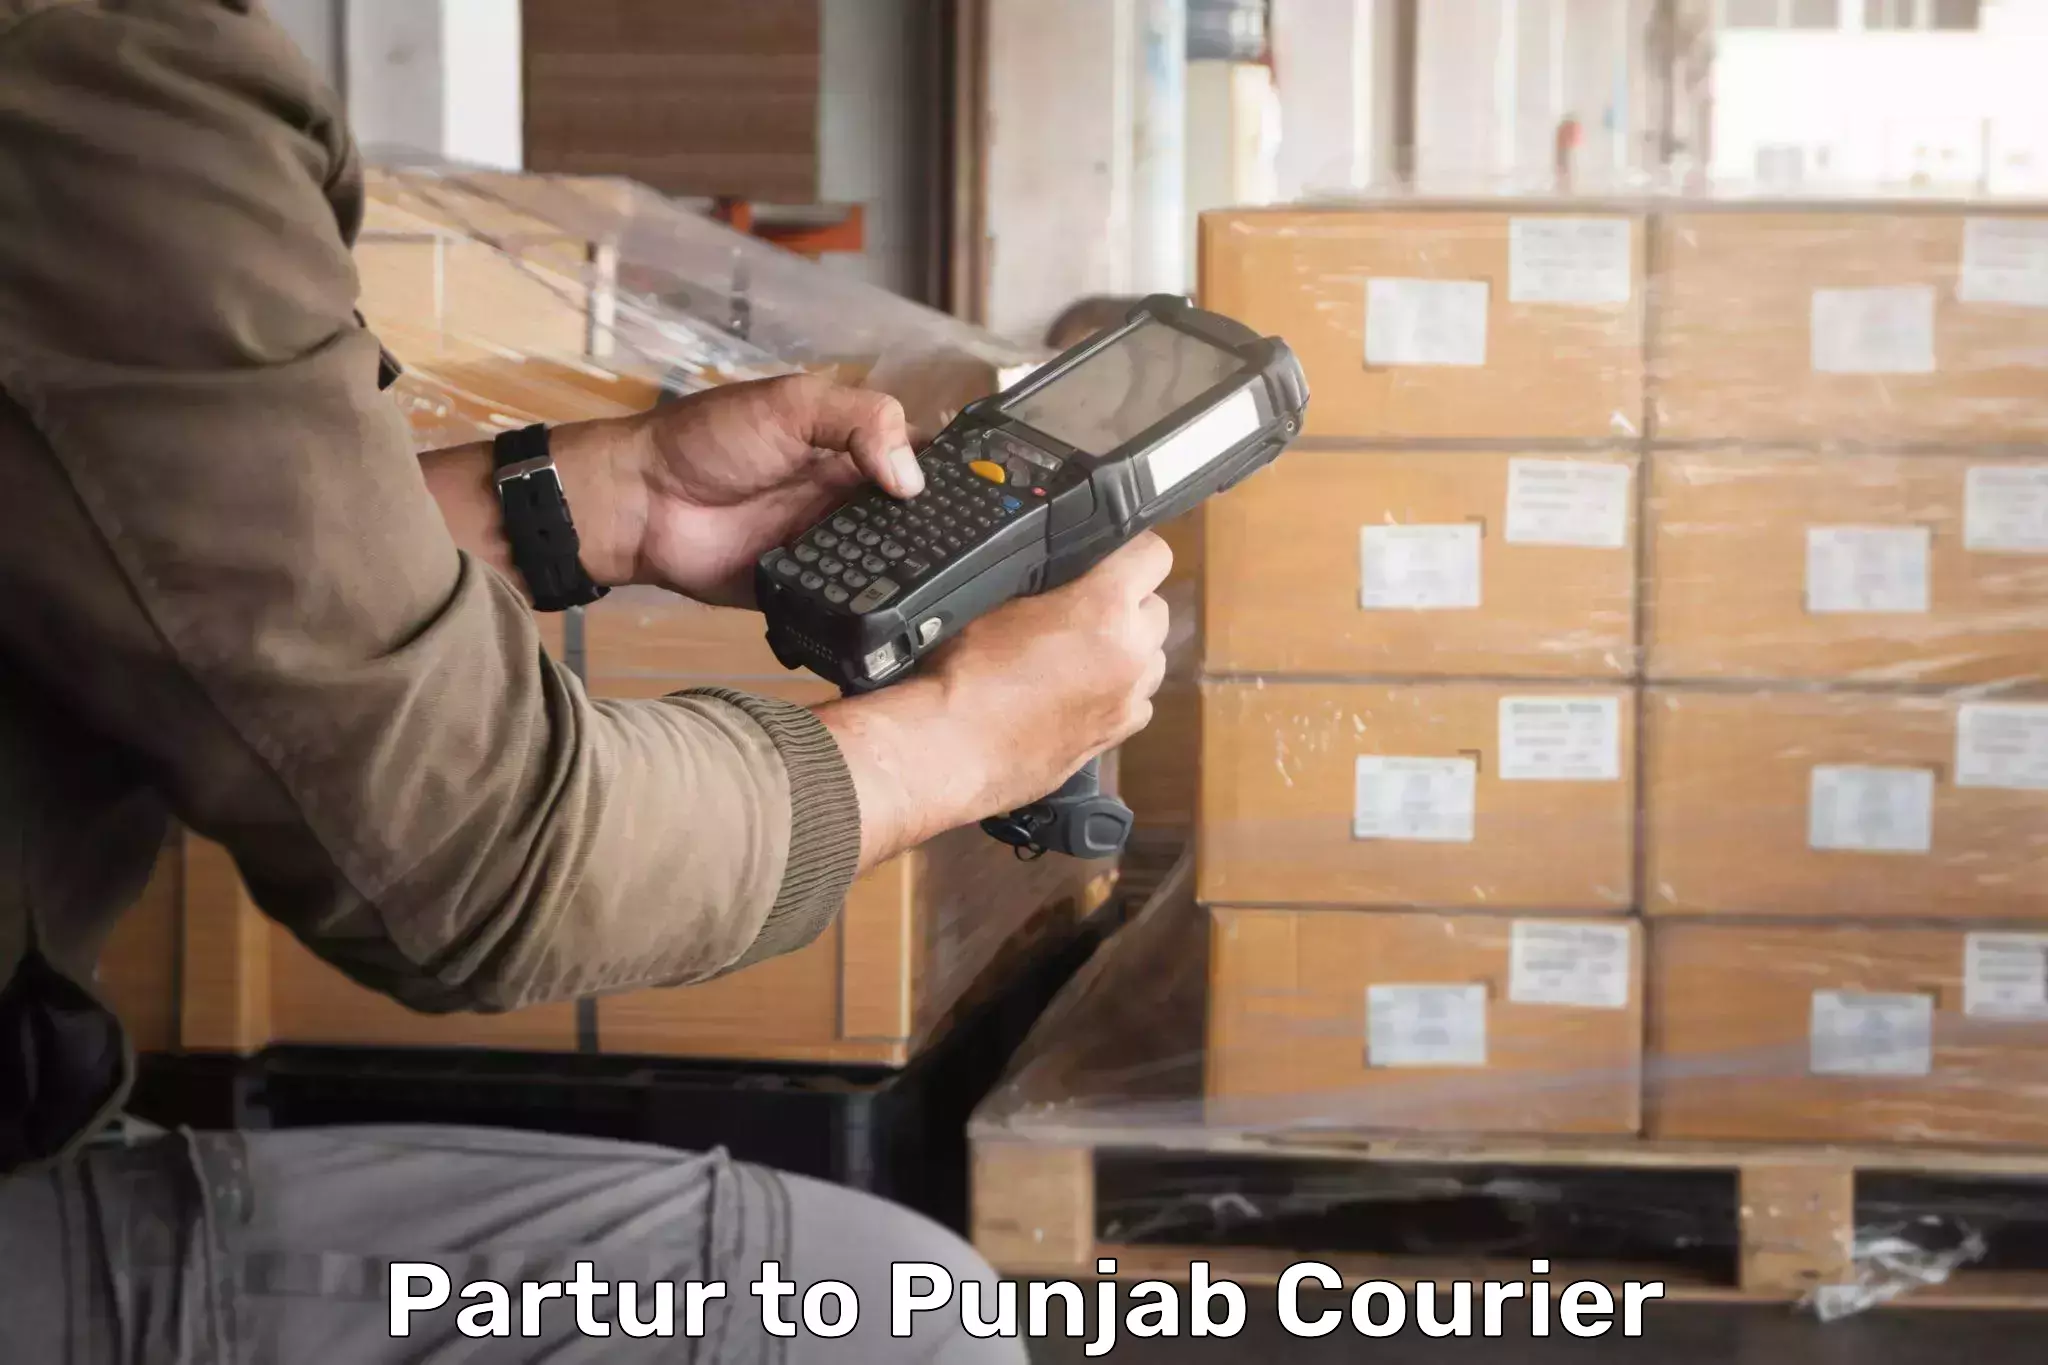 Advanced shipping services Partur to Central University of Punjab Bathinda